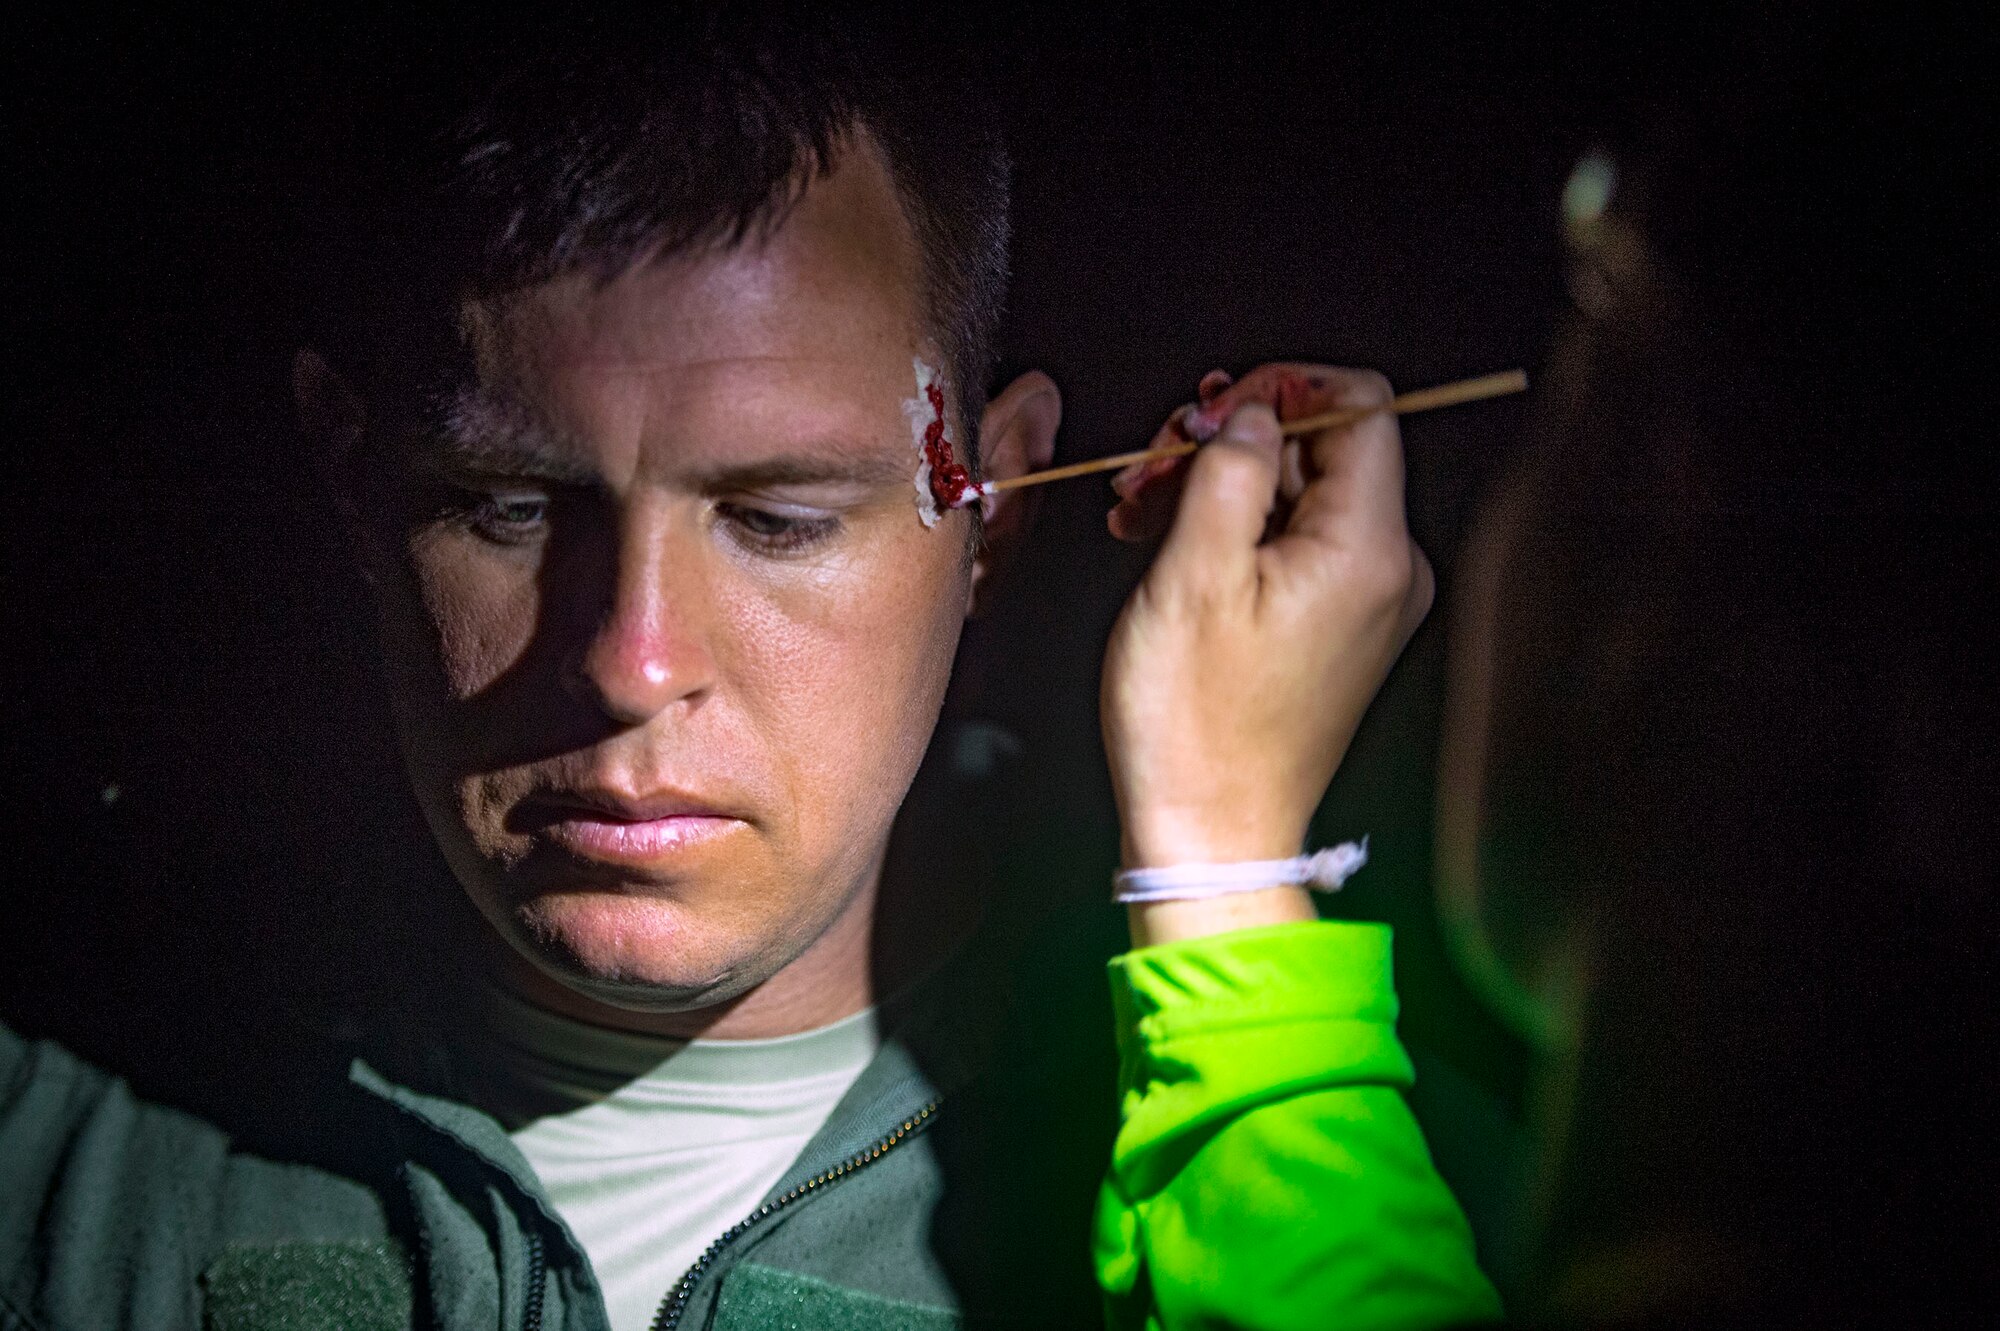 An independent duty medical technician from the 38th Rescue Squadron (RQS) paints simulated wounds onto Tech. Sgt. Levi Wood, 347th Operations Support Squadron NCO in charge of survival evasion resistance and escape (SERE) training, during a personnel recovery scenario as part of pre-deployment ‘spin-up’ training, Dec. 15, 2018, at Avon Park Air Force Range, Fla. During this pre-deployment ‘spin-up’ training, Moody’s 347th Rescue Group tested and maximized their combat search and rescue (CSAR) and personnel recovery capabilities. Under normal circumstances, the HH-60G Pave Hawk helicopter crews and maintainers deploy from Moody and integrate with Guardian Angel teams from different bases. This time, Moody’s 38th RQS and 41st RQS’s will deploy together and utilized this exercise to improve their mission readiness and cohesion before their departure. (U.S. Air Force photo by Senior Airman Greg Nash)